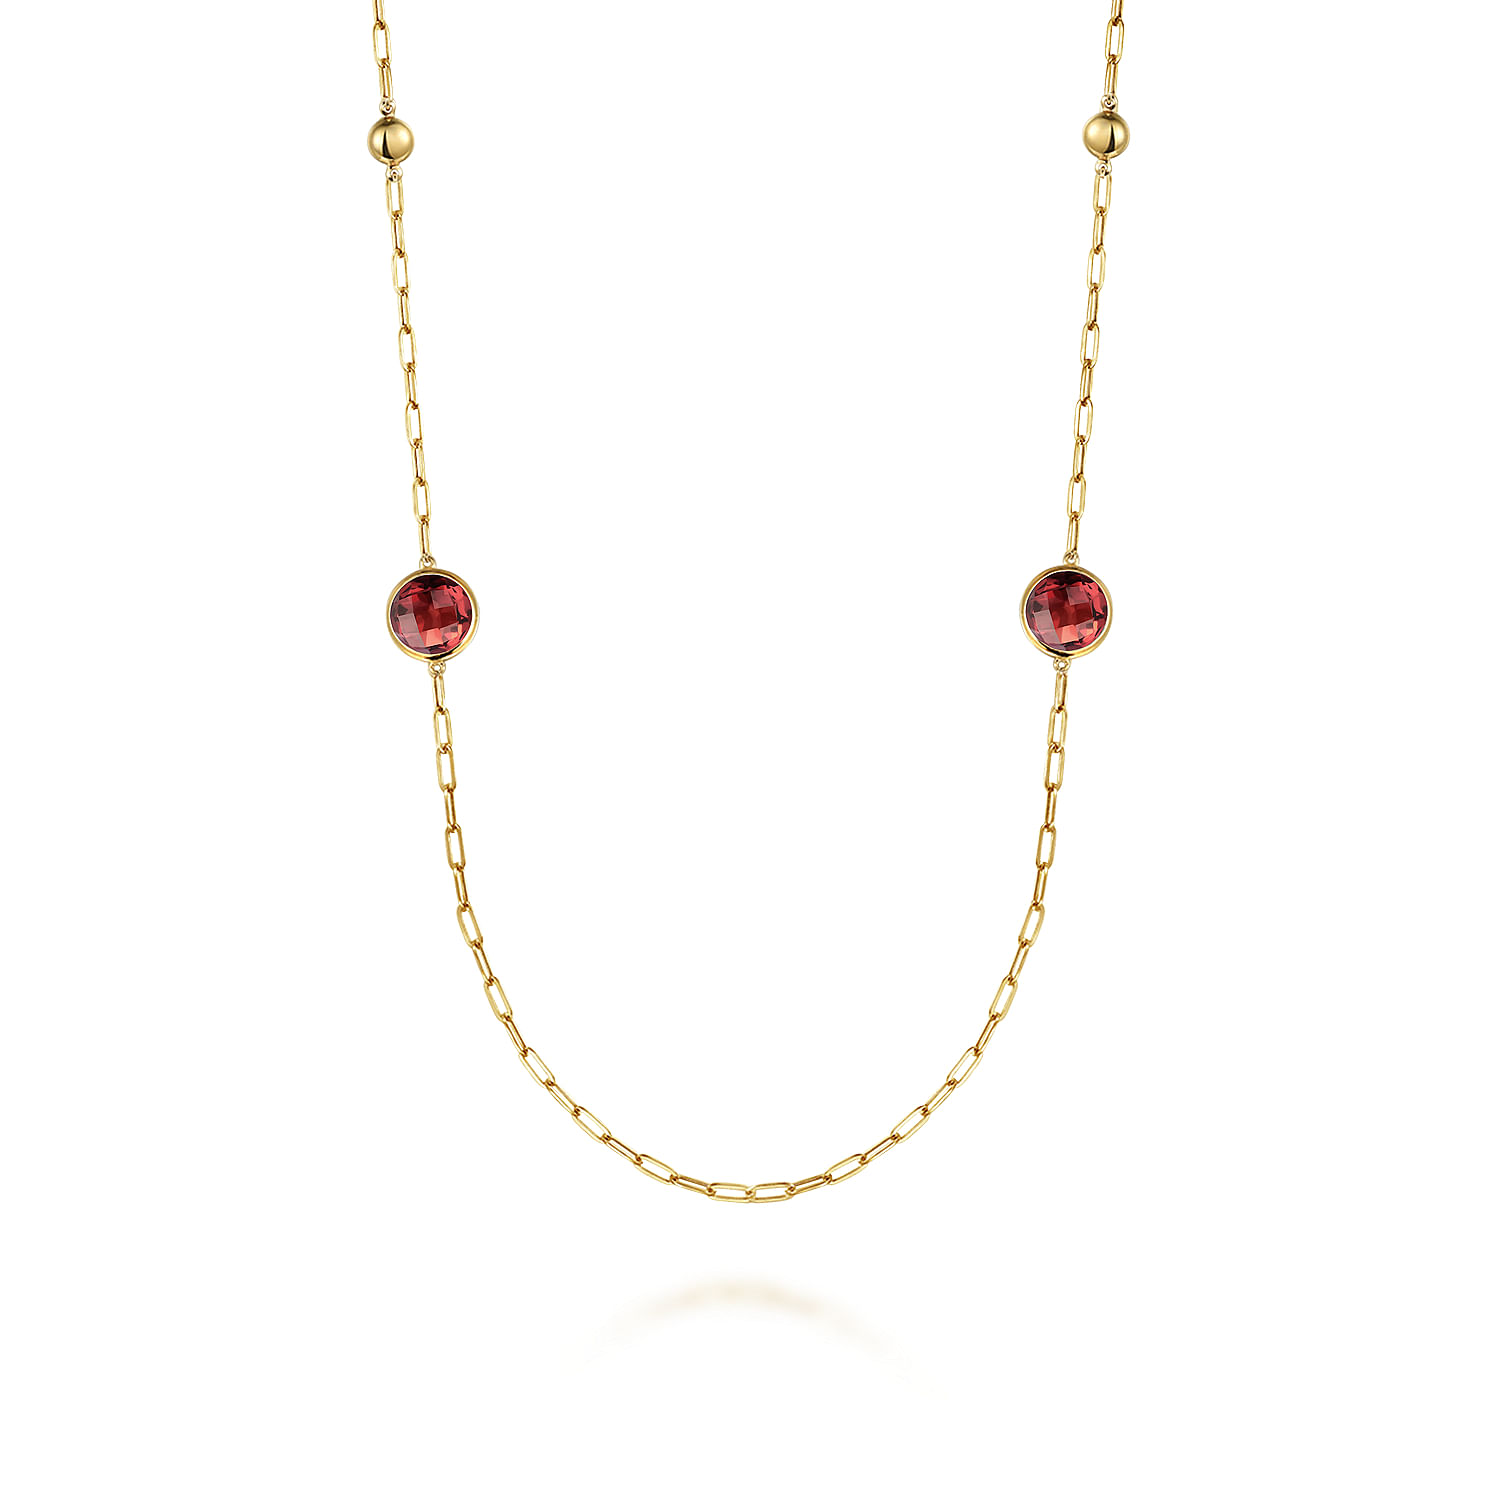 14K Yellow Gold Garnet Round Shape Necklace With Four Stations ,Beads and Bezel Setting